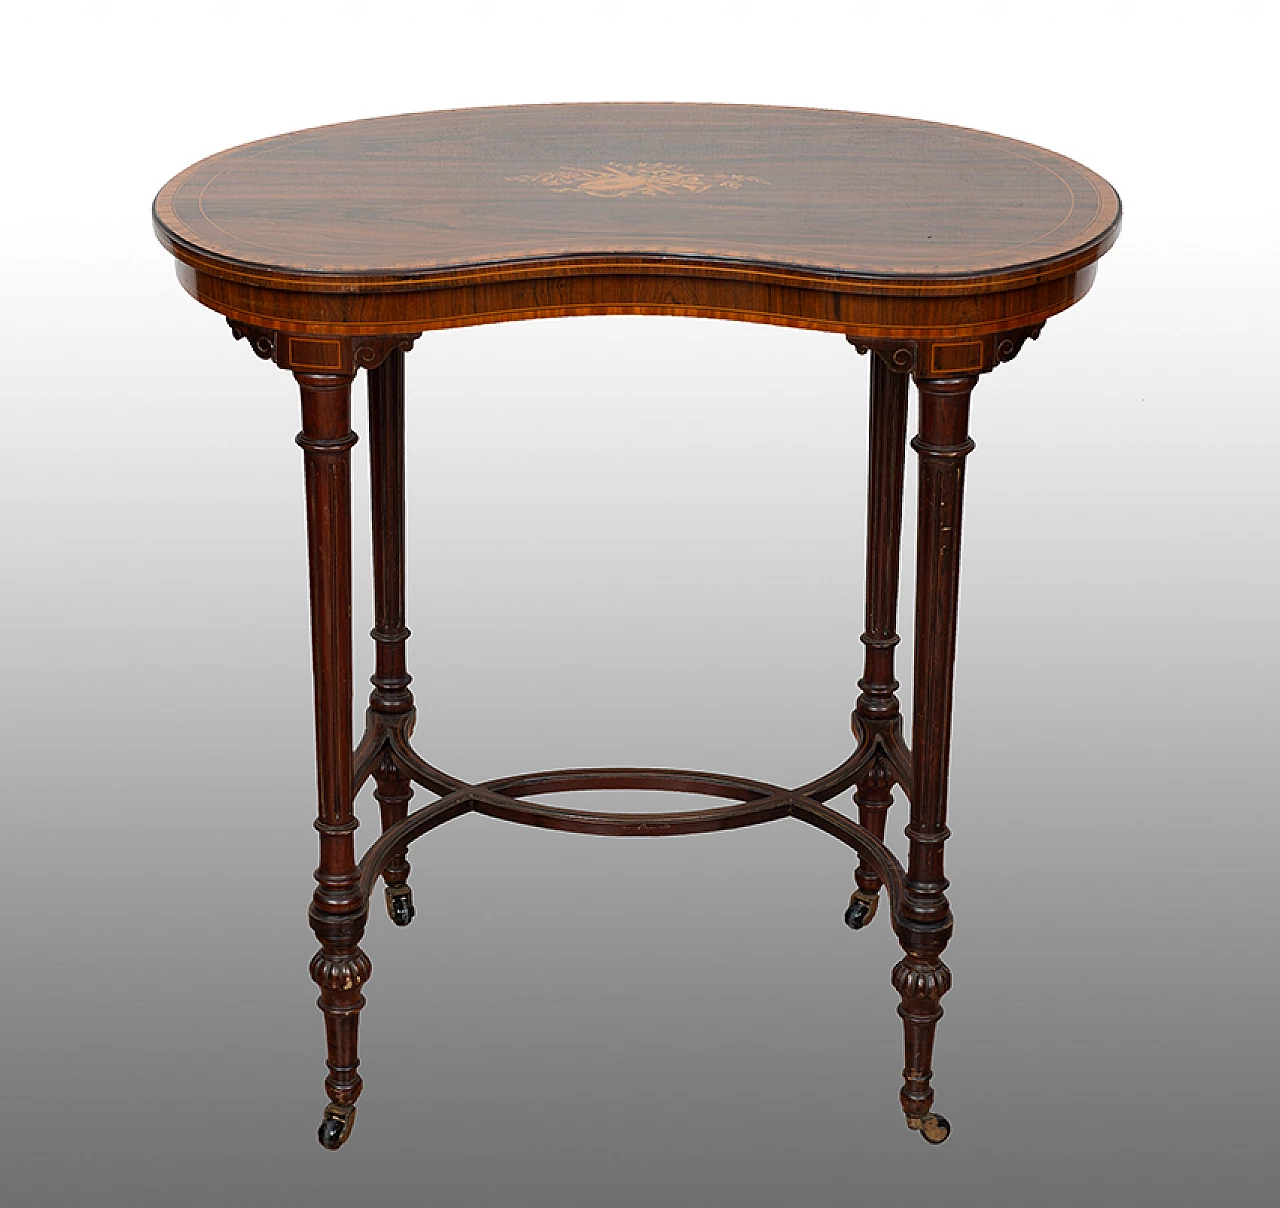 Eduardian coffee table in exotic precious woods with maple inlays, 19th century 1